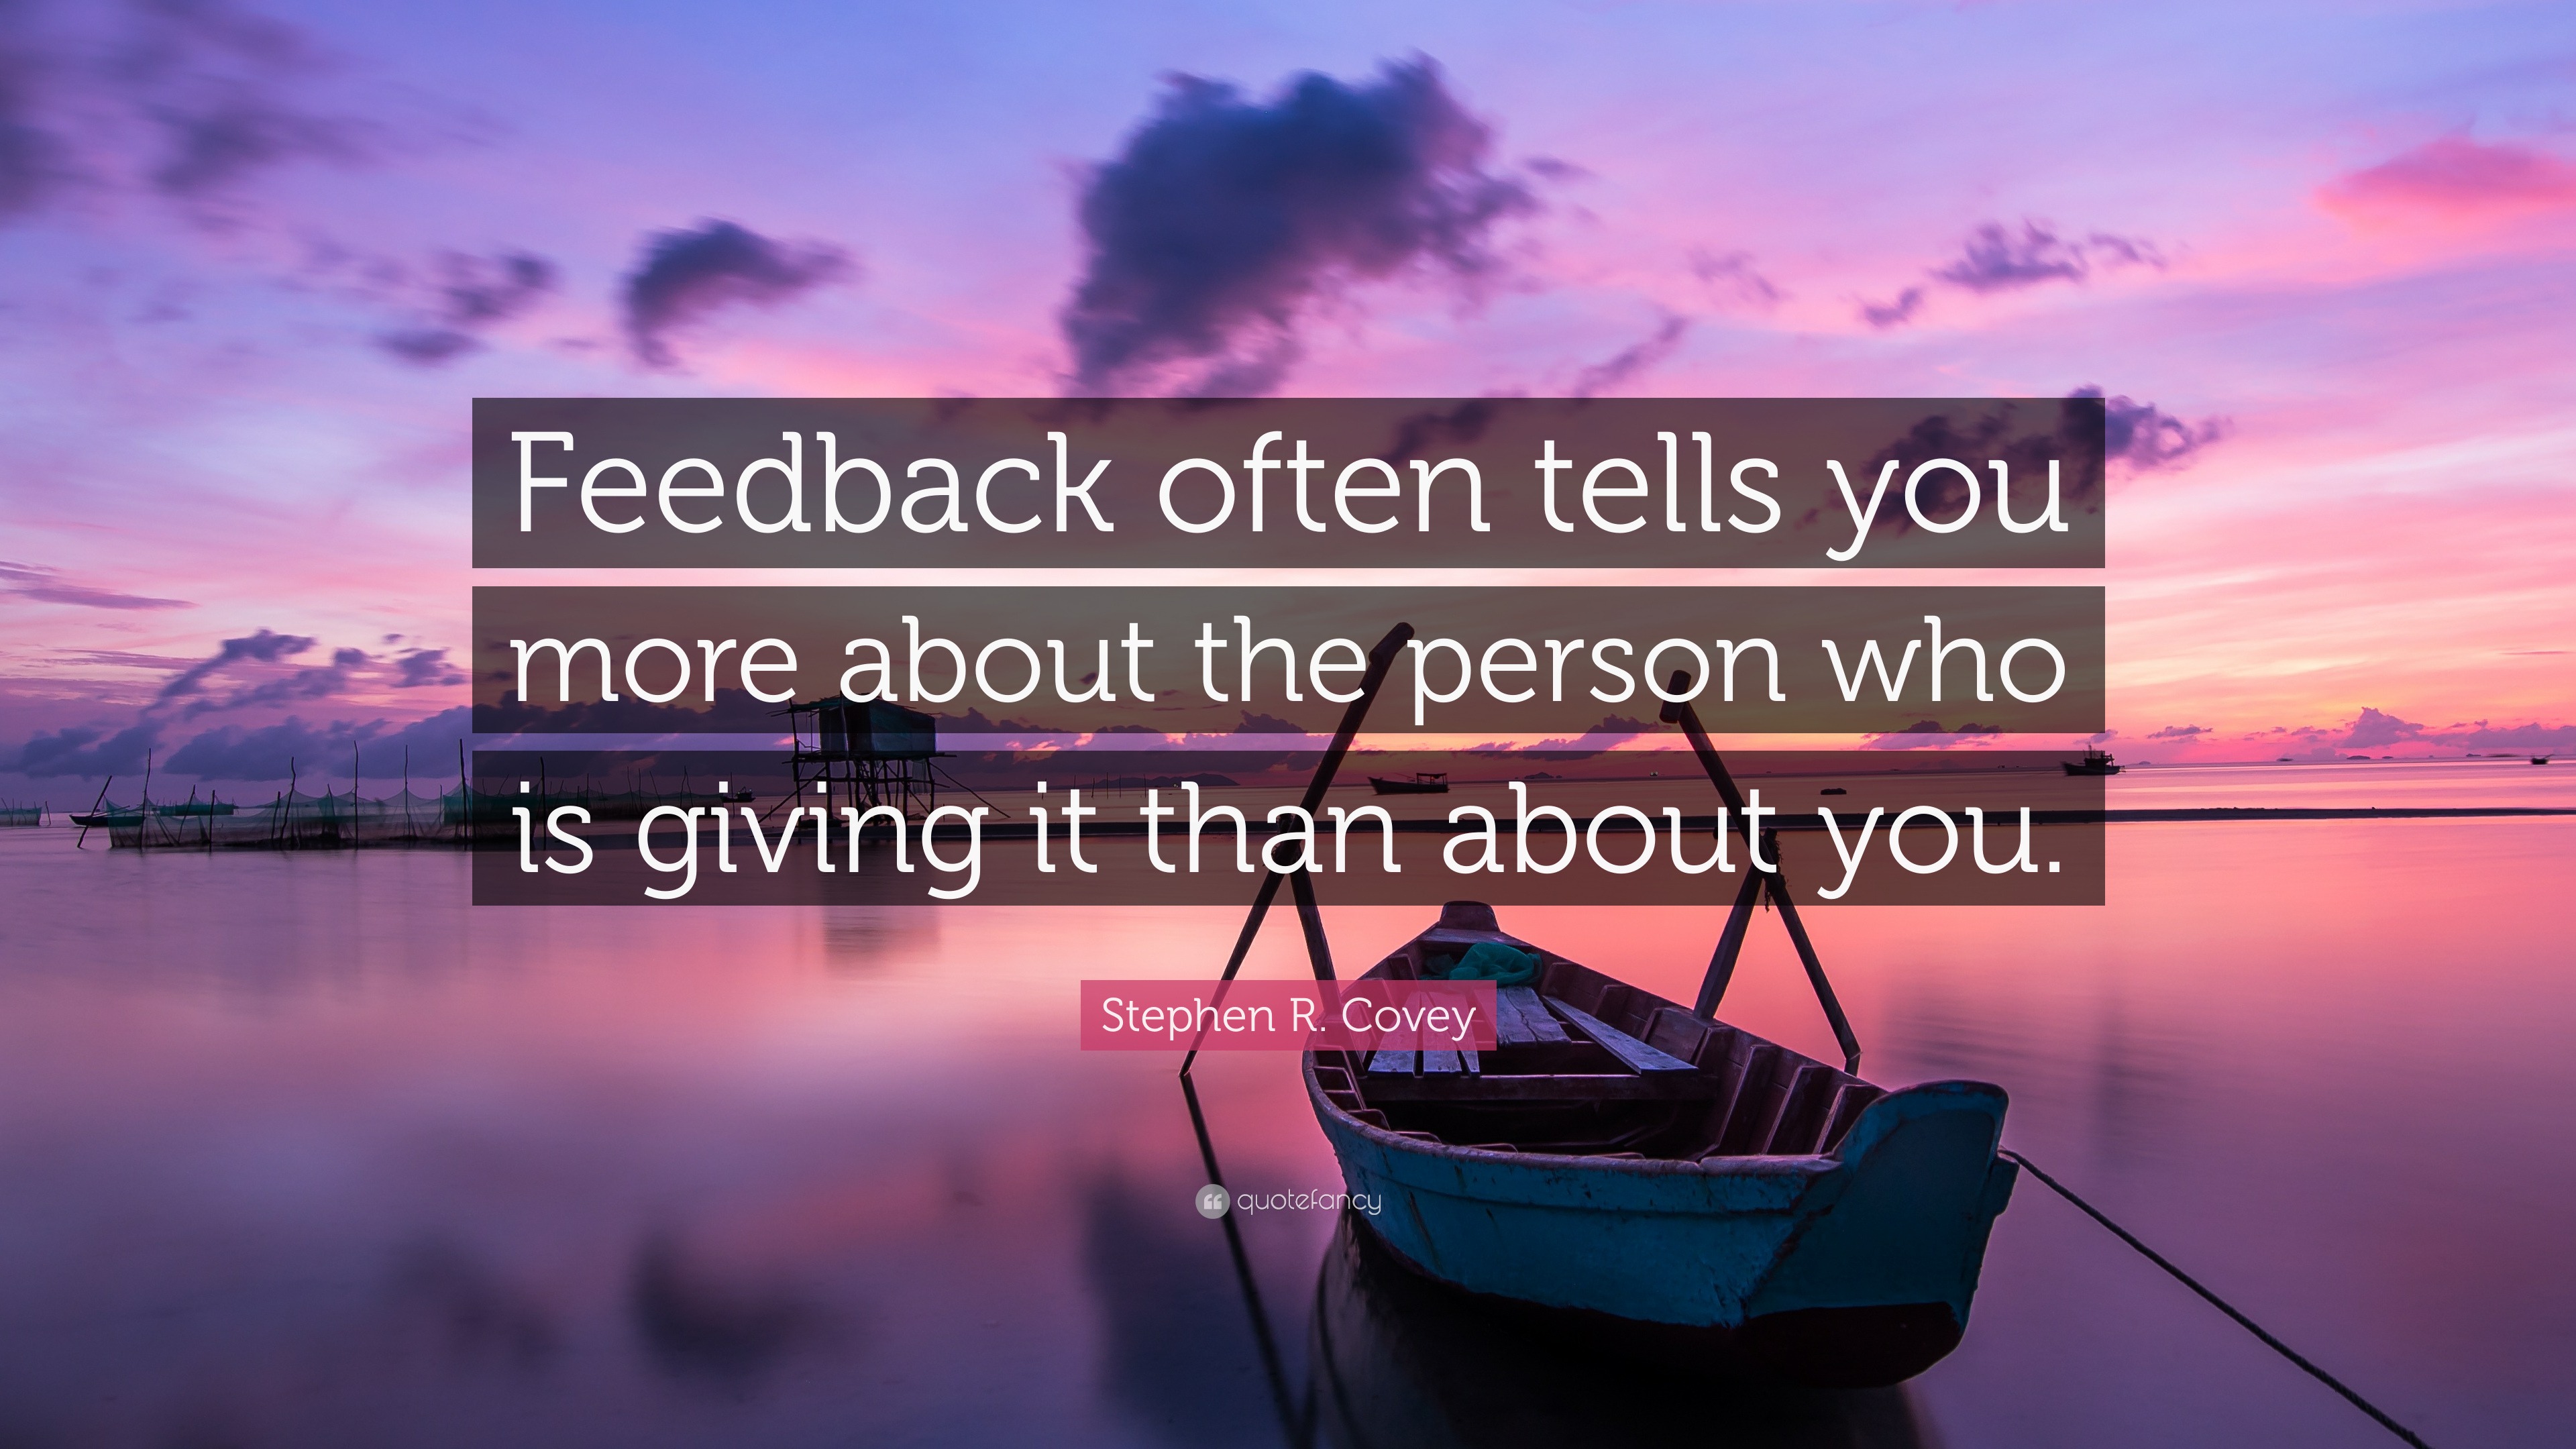 2879898 Stephen R Covey Quote Feedback often tells you more about the